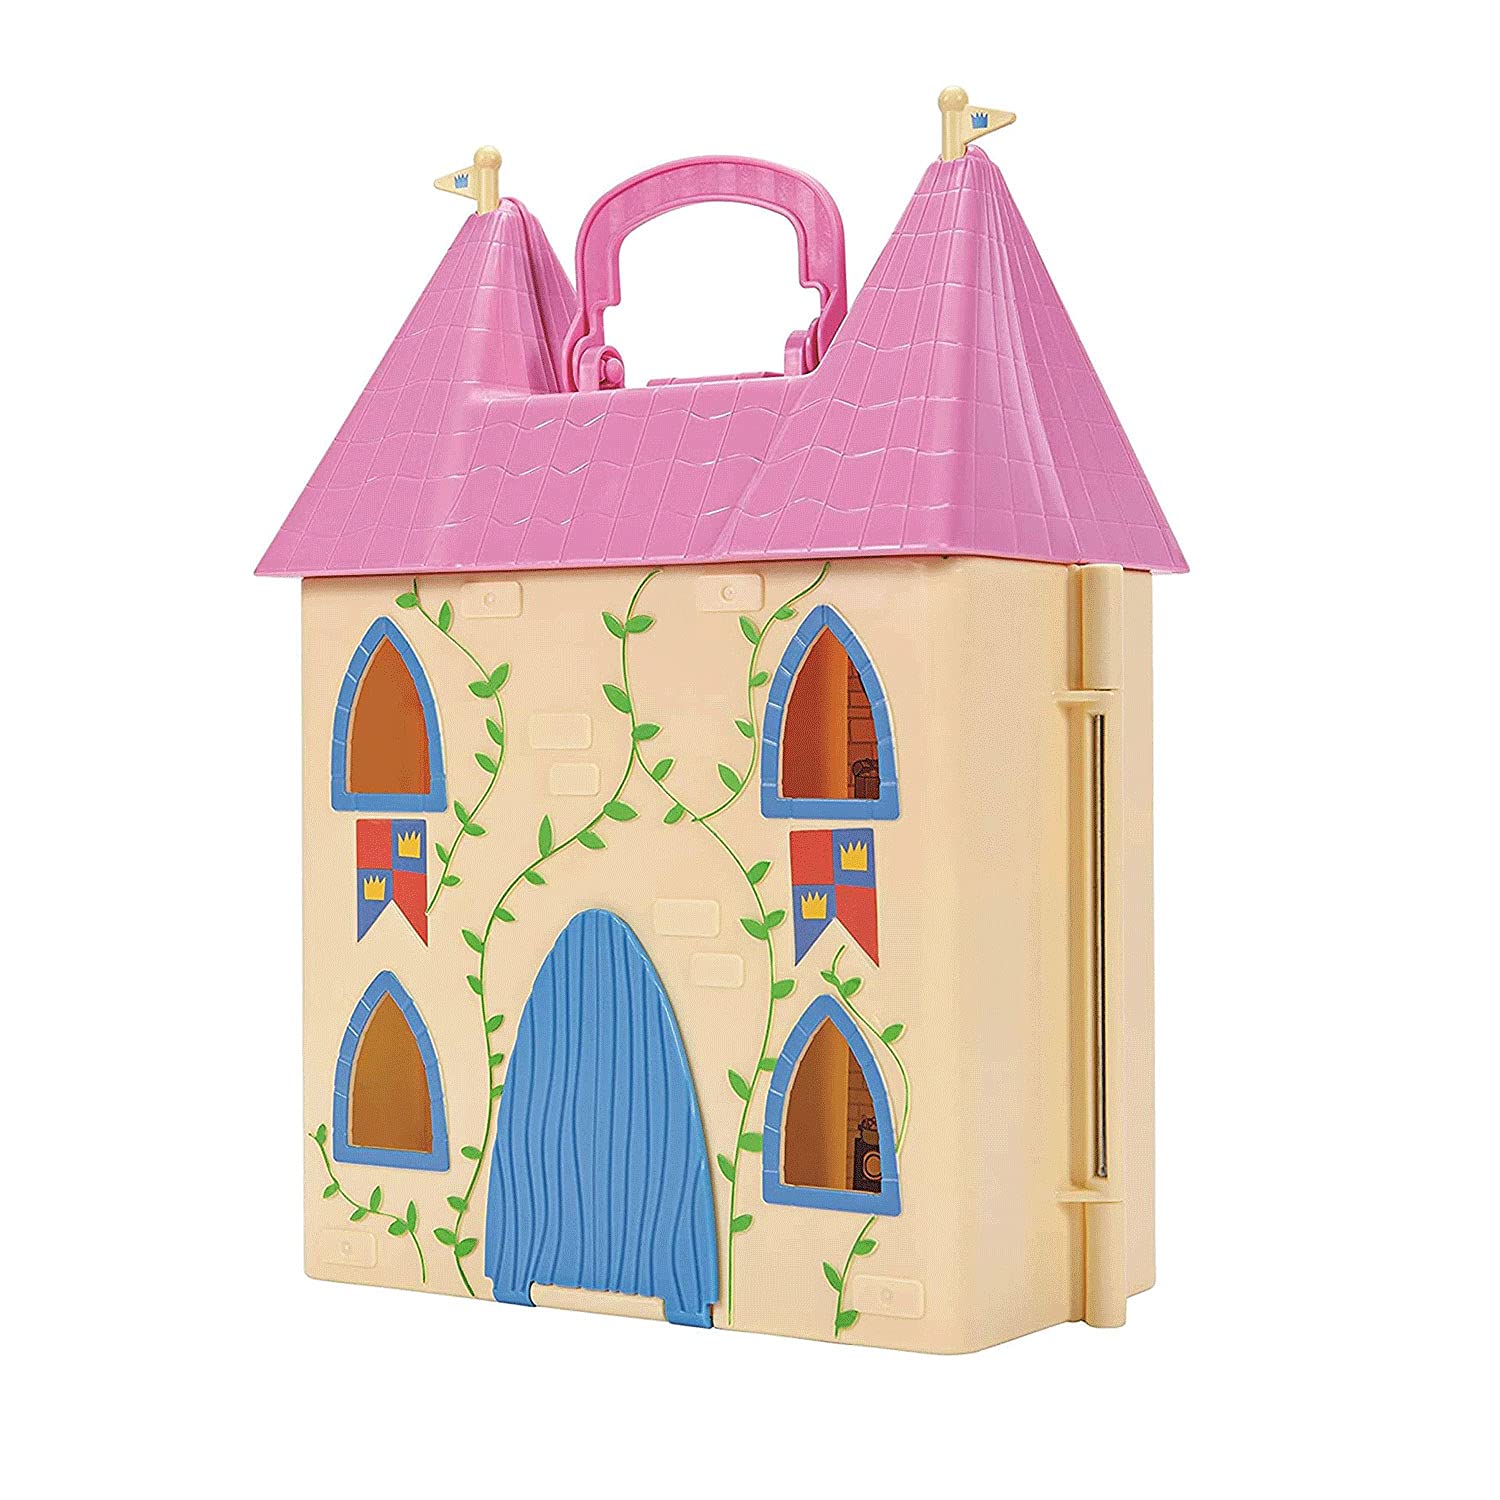 Peppa Pig 99803 Foldable Deluxe Royal Tea Party Princess Castle Playset with Character Figurines and Furniture Pieces for Ages 2 and Up